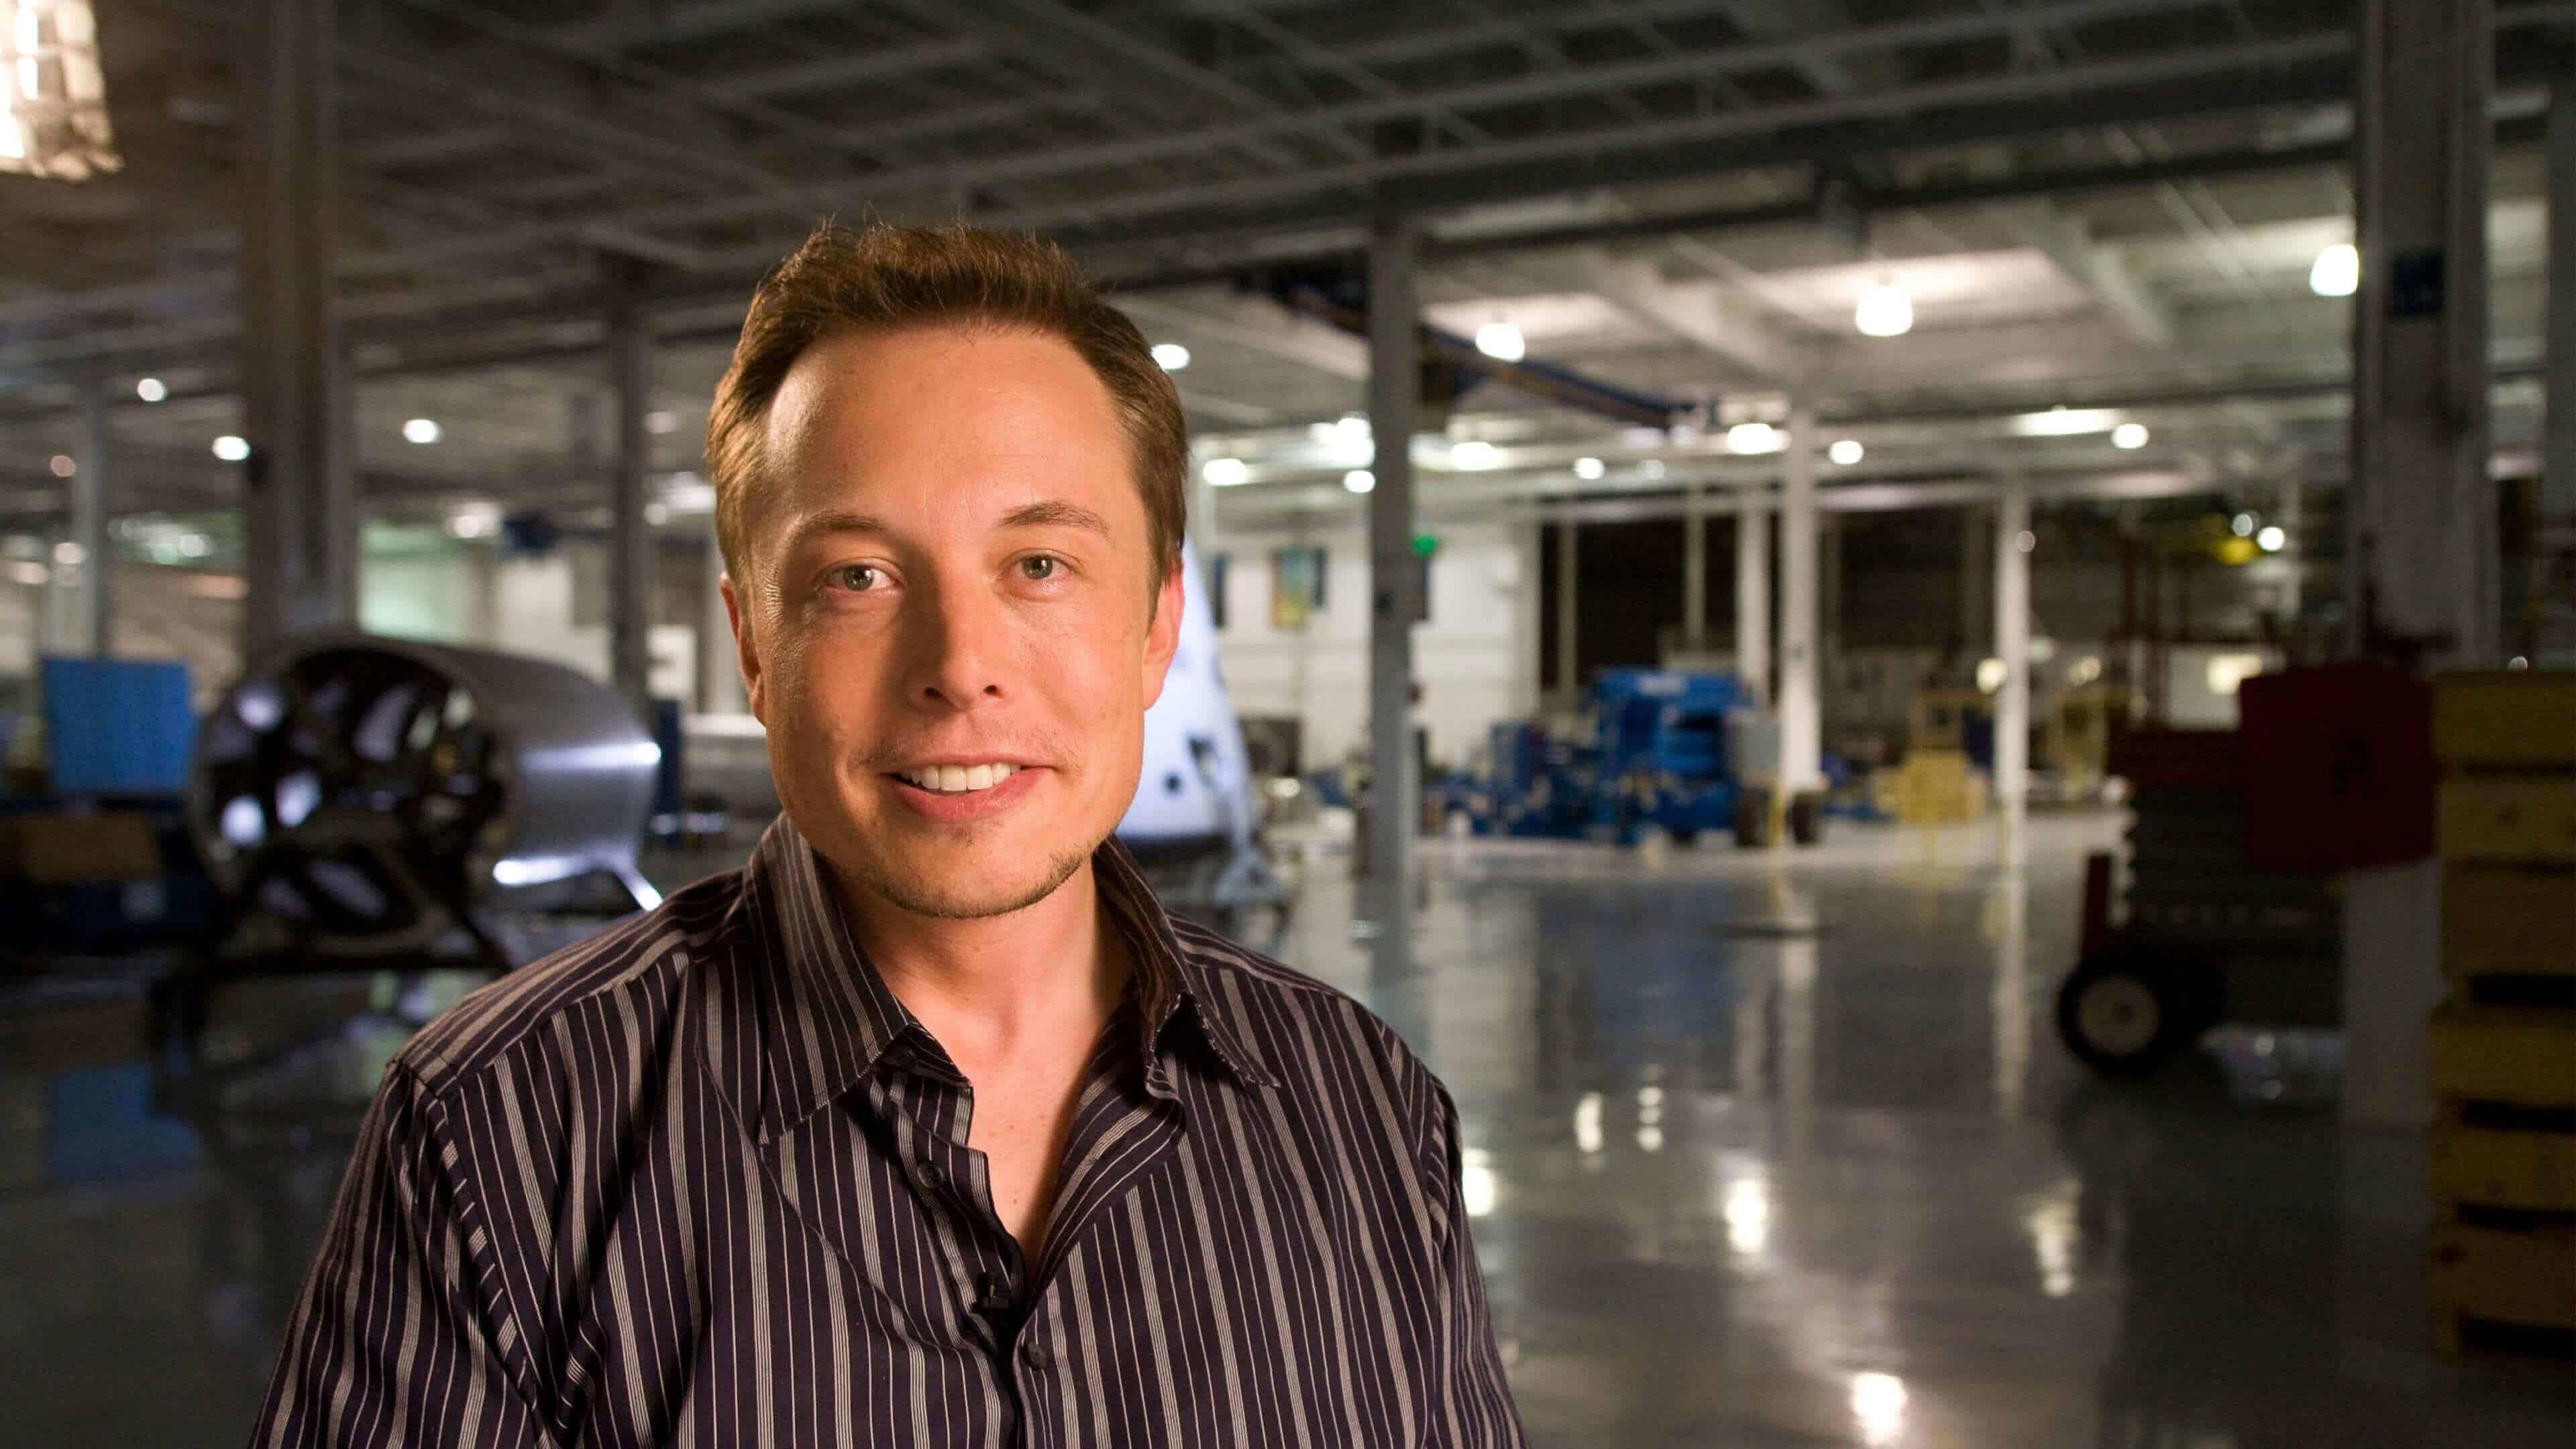 Elon Musk: The founder, CEO, and chief engineer of SpaceX. 3840x2160 4K Wallpaper.